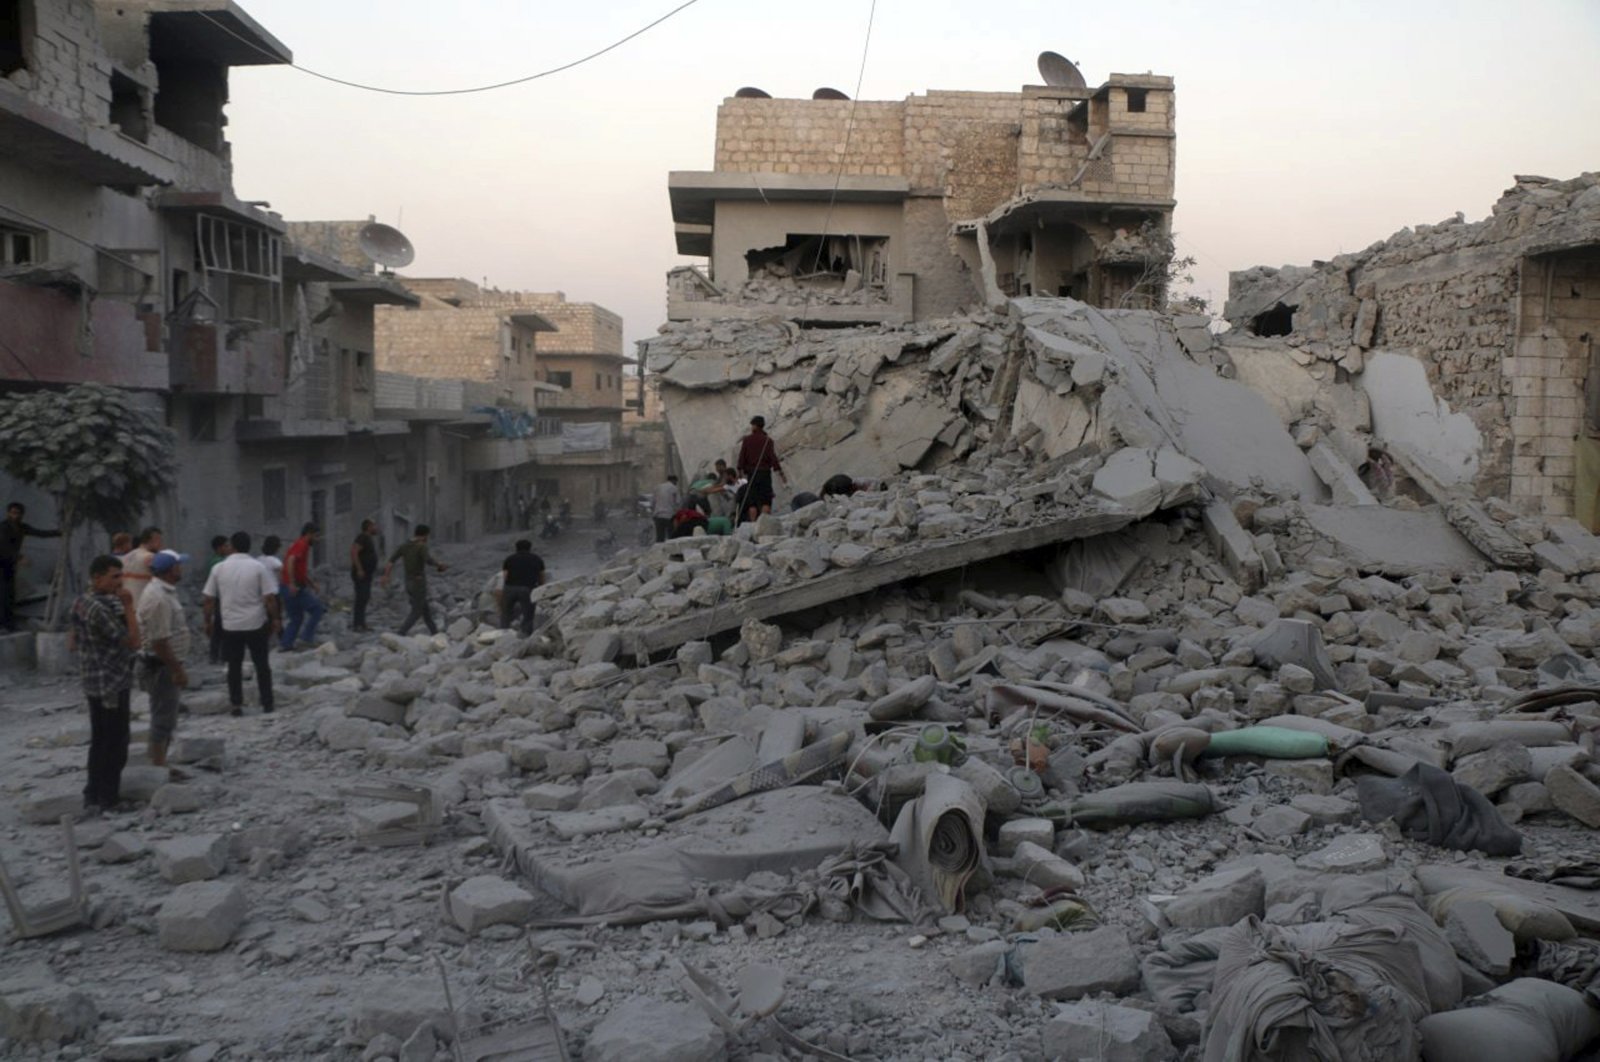 People search for victims under the rubble of destroyed buildings that were hit by regime airstrikes in the northern town of Maaret al-Numan, in Idlib province, Syria, Aug. 28, 2019. (AP Photo)